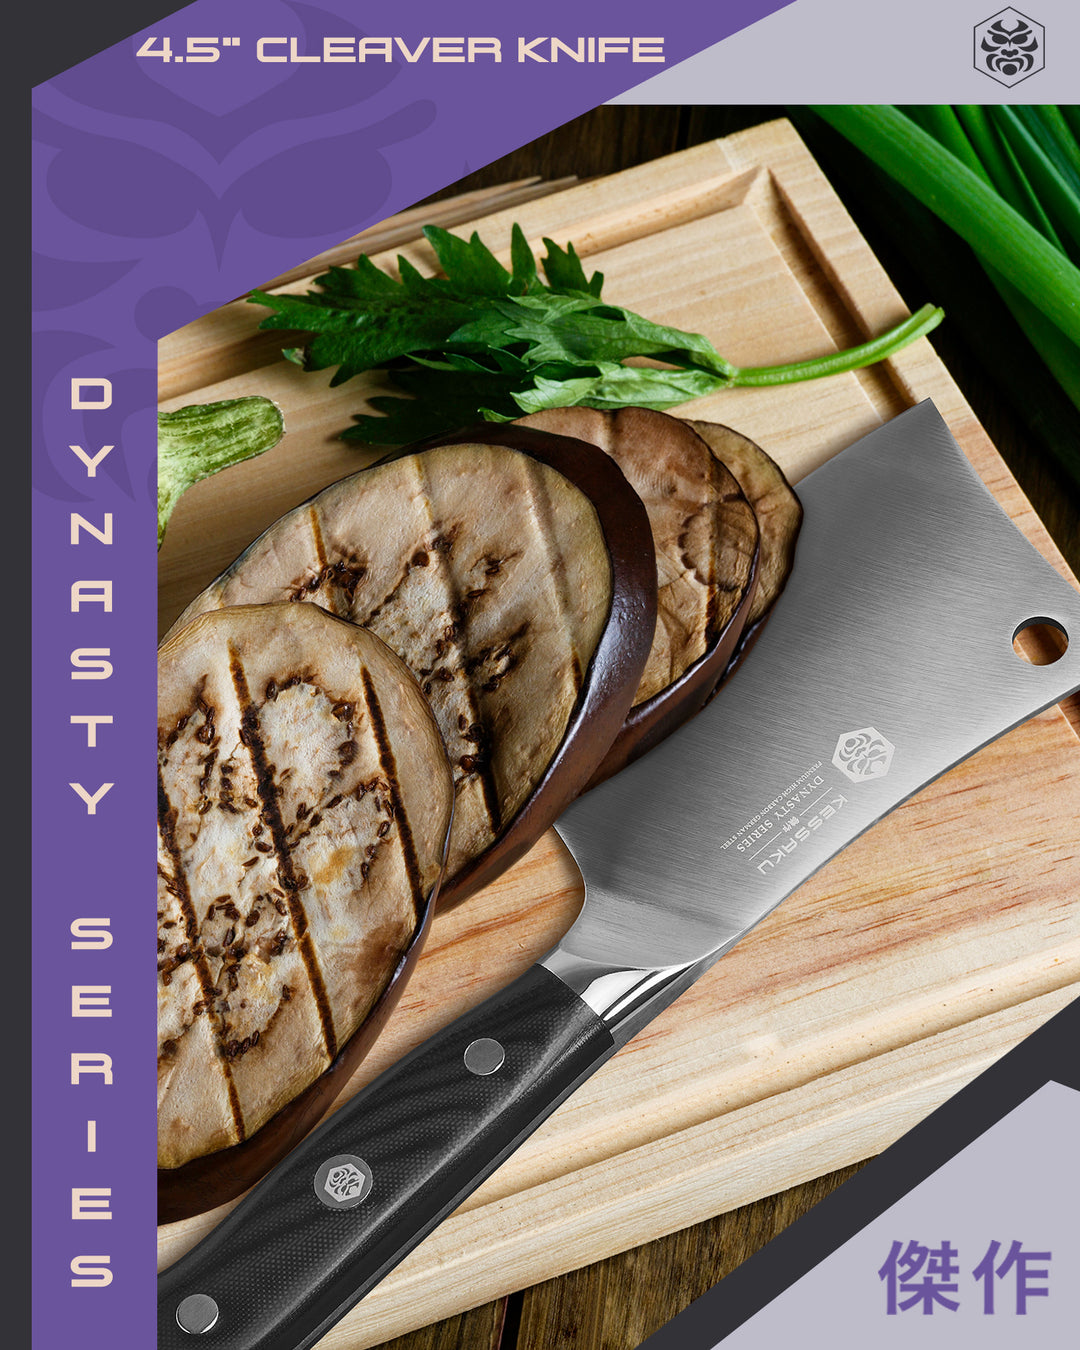 Thick slices of eggplant next to the Dynasty Mini Cleaver